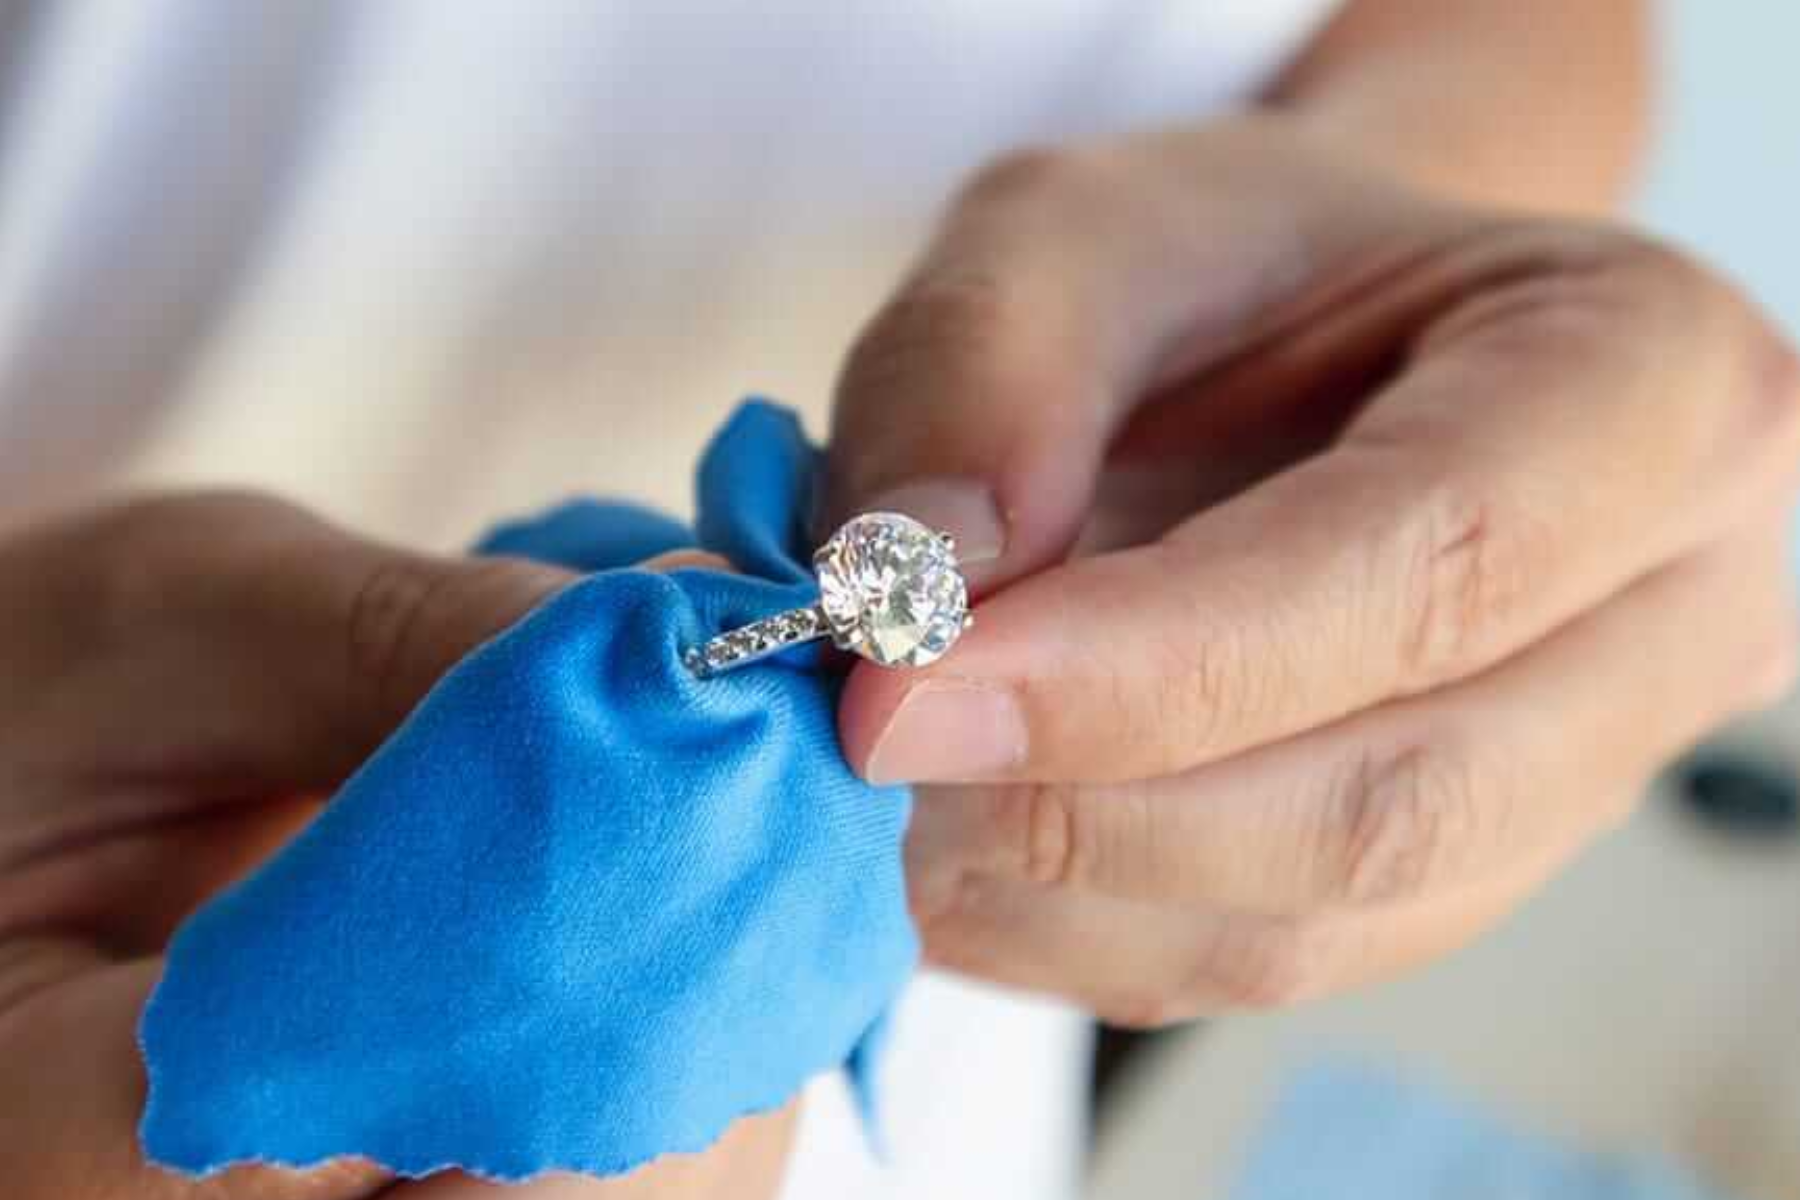 A pave engagement ring being cleaned by a man's hand using blue cotton